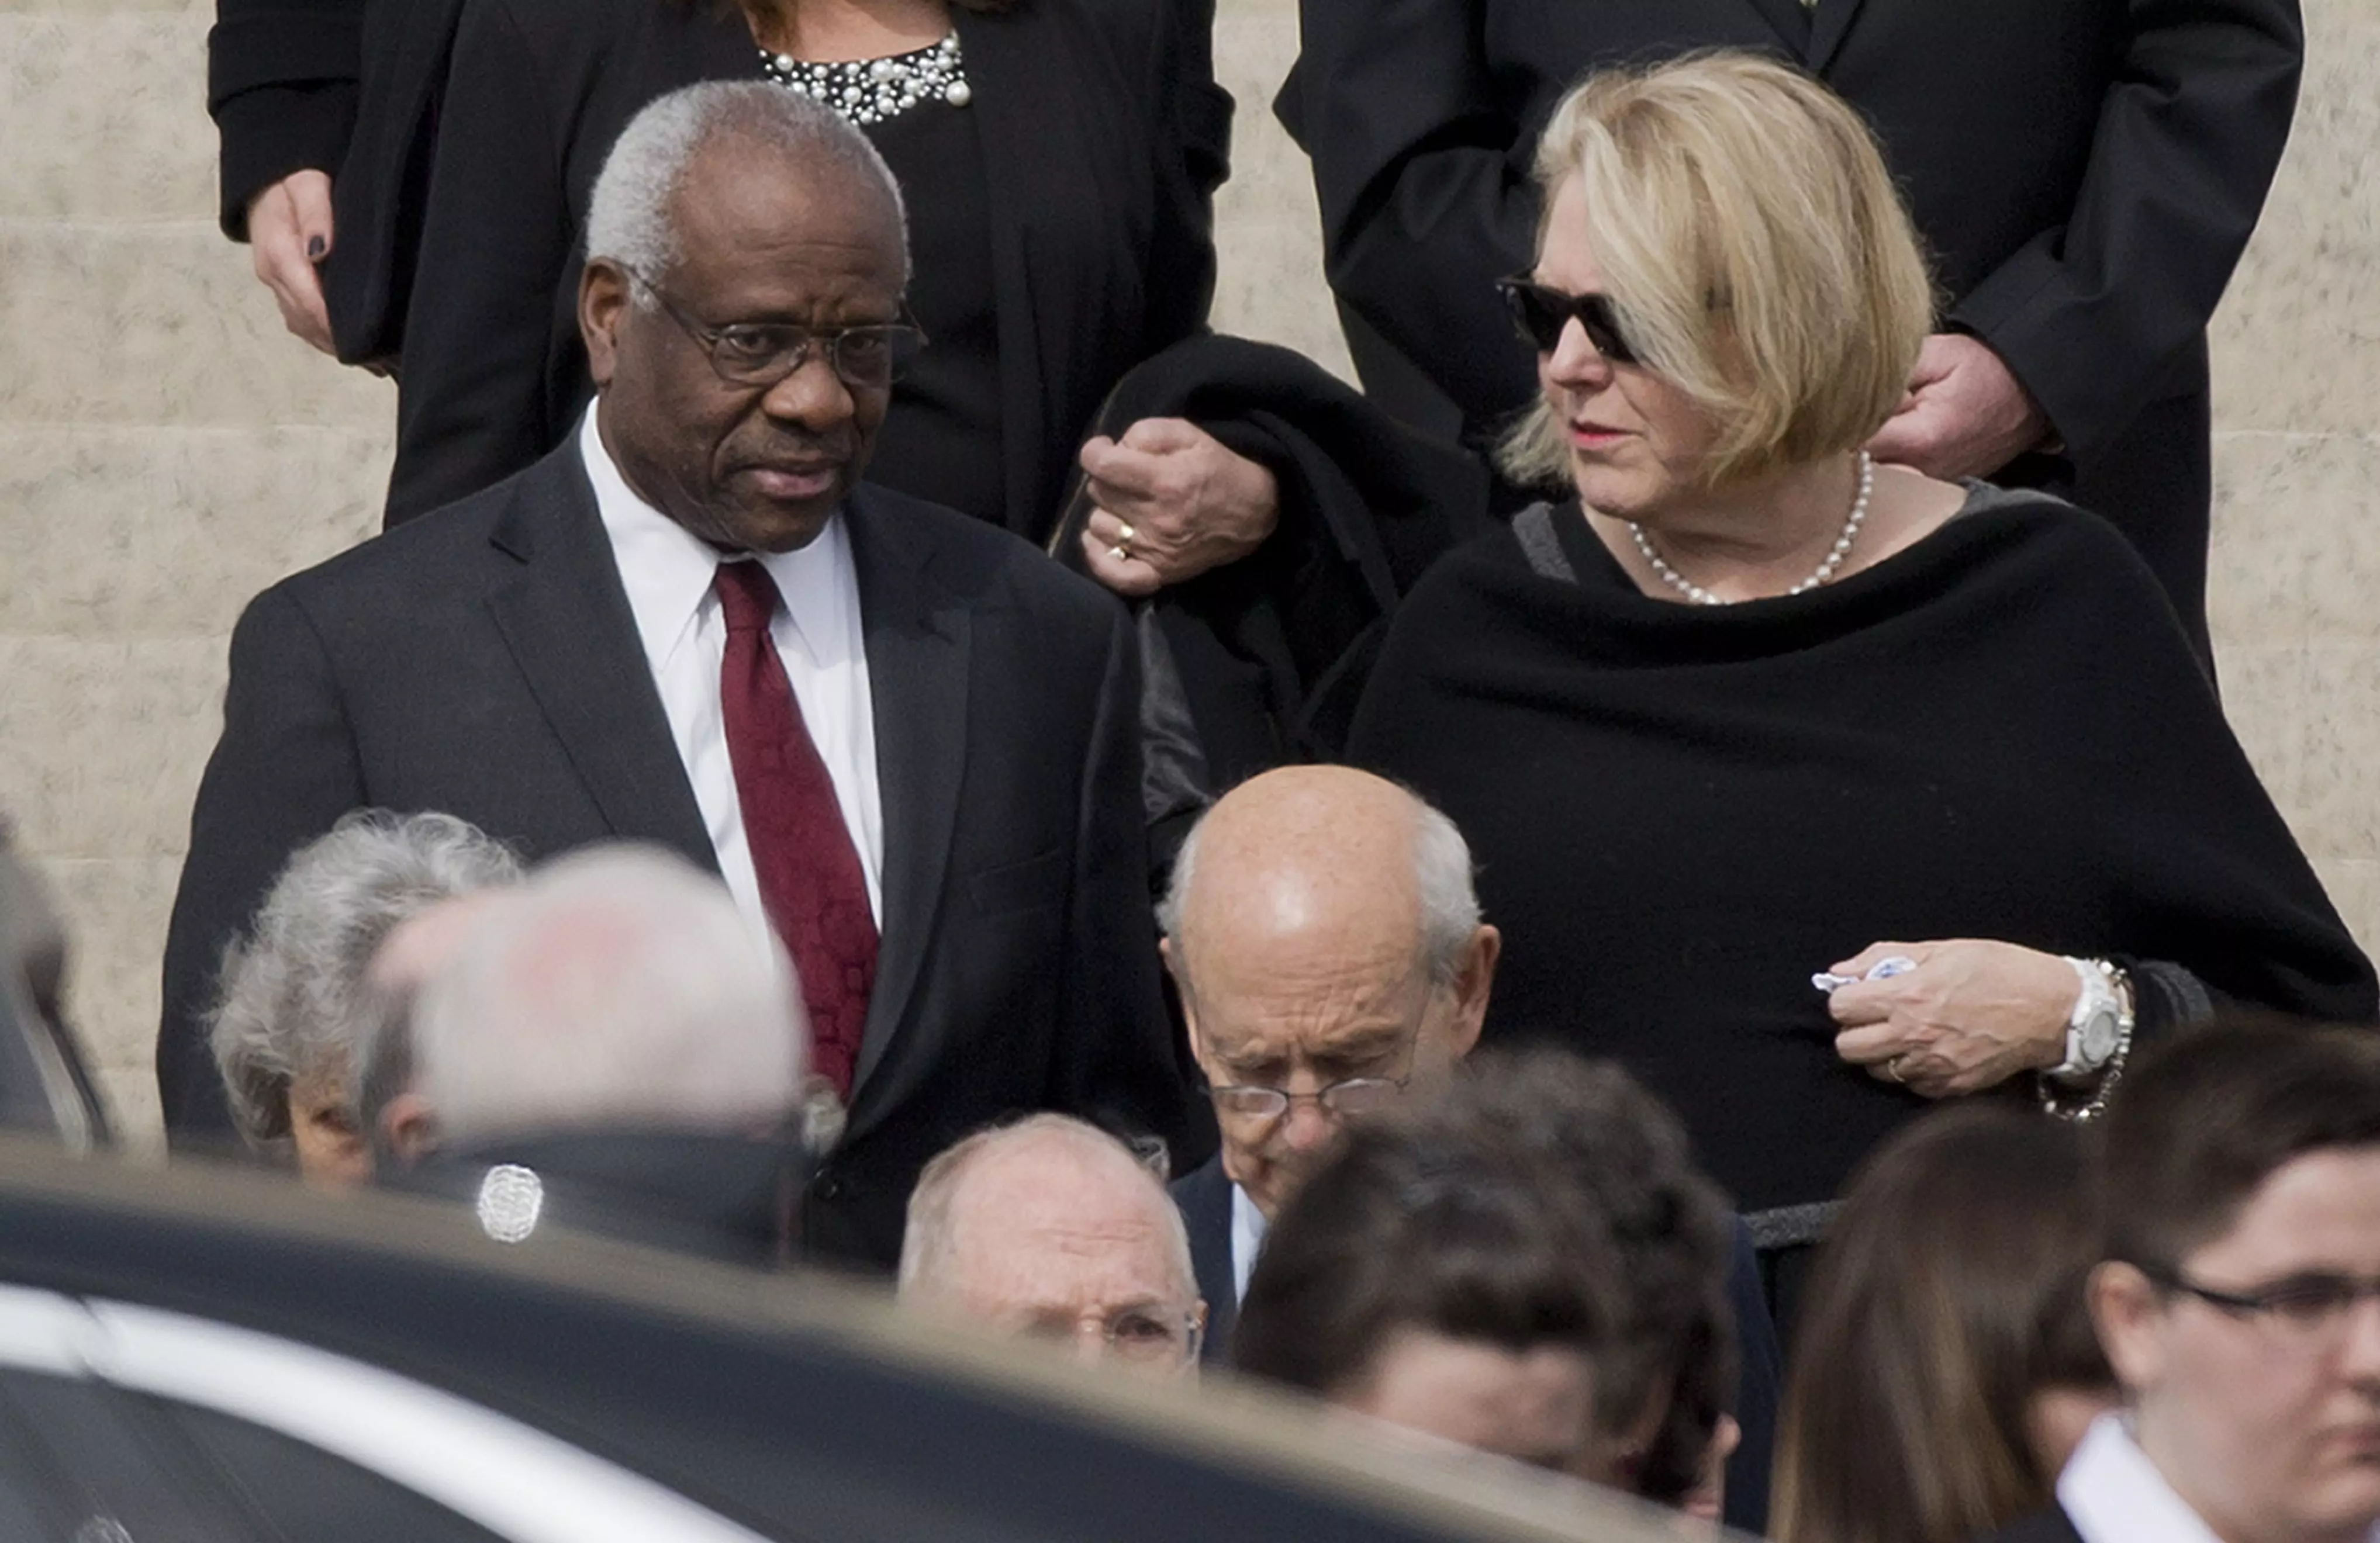 Supreme Court Justice Clarence Thomas and his wife, Ginni, leave funeral services for the late Justice Antonin Scalia.